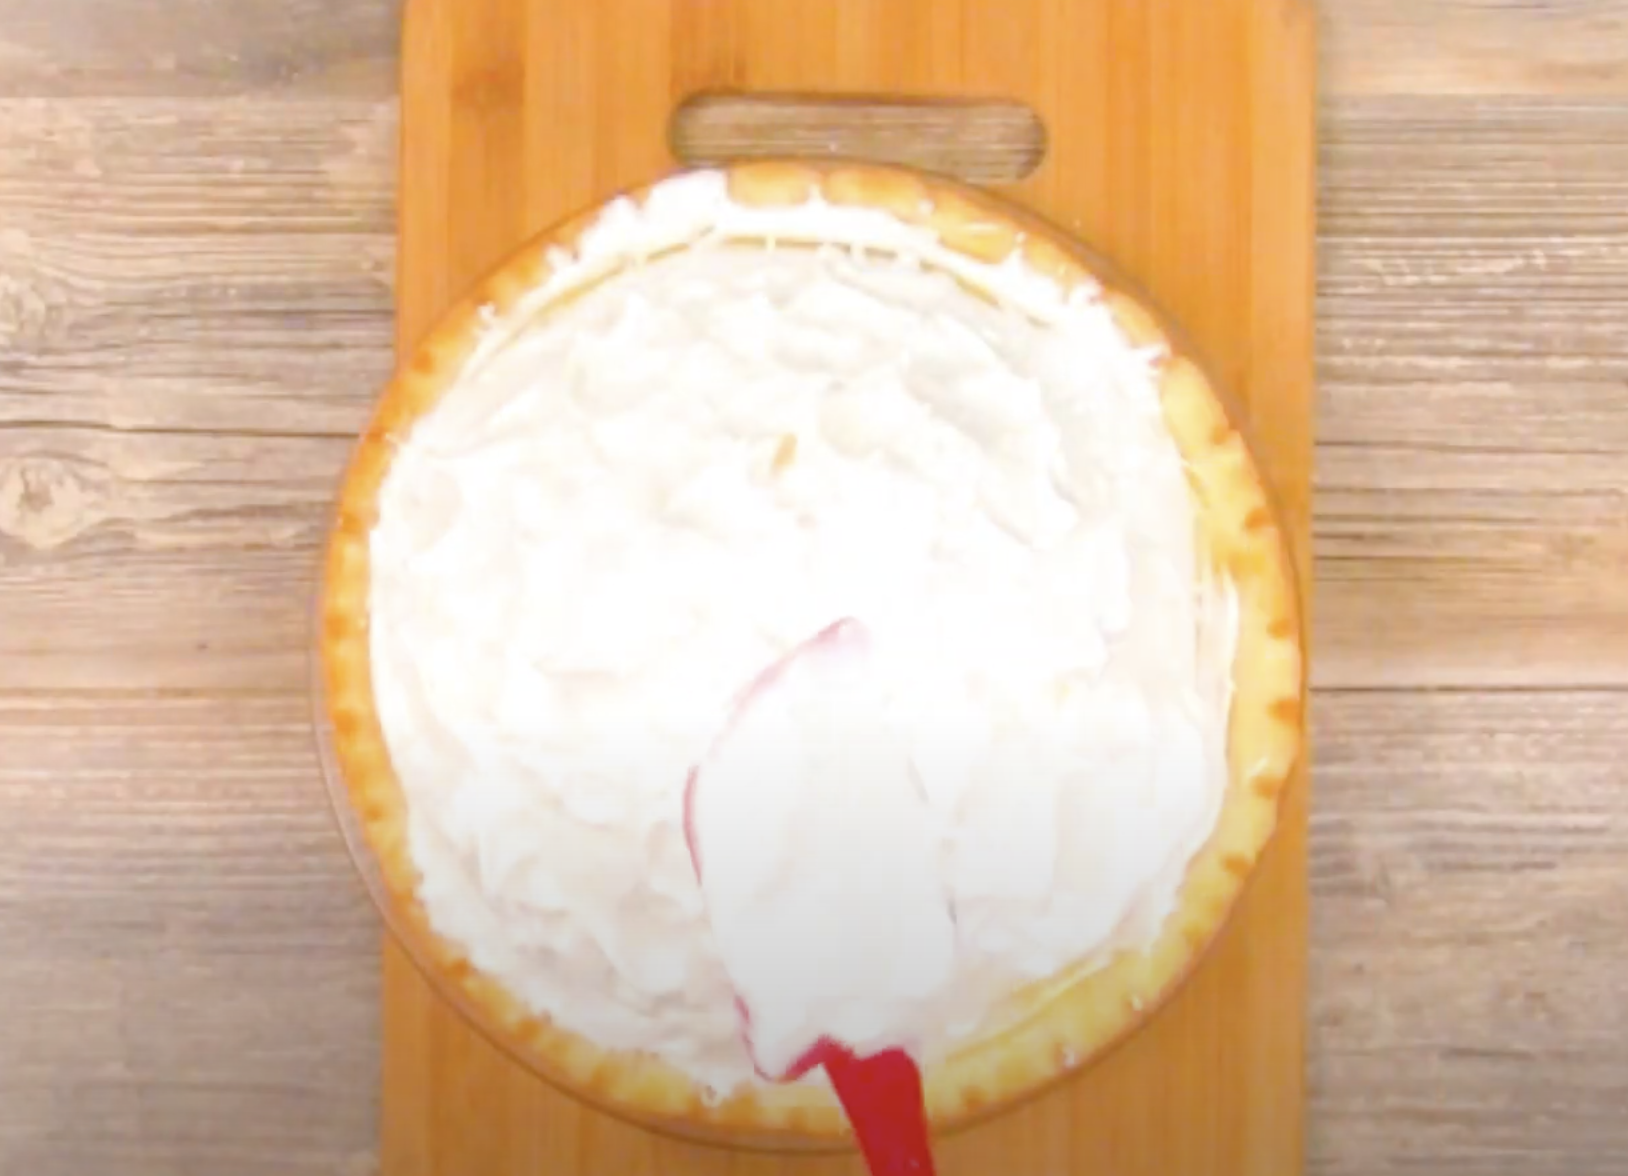 Top pie with meringue and bake at 325 about 10 minutes or until meringue is lightly browned.